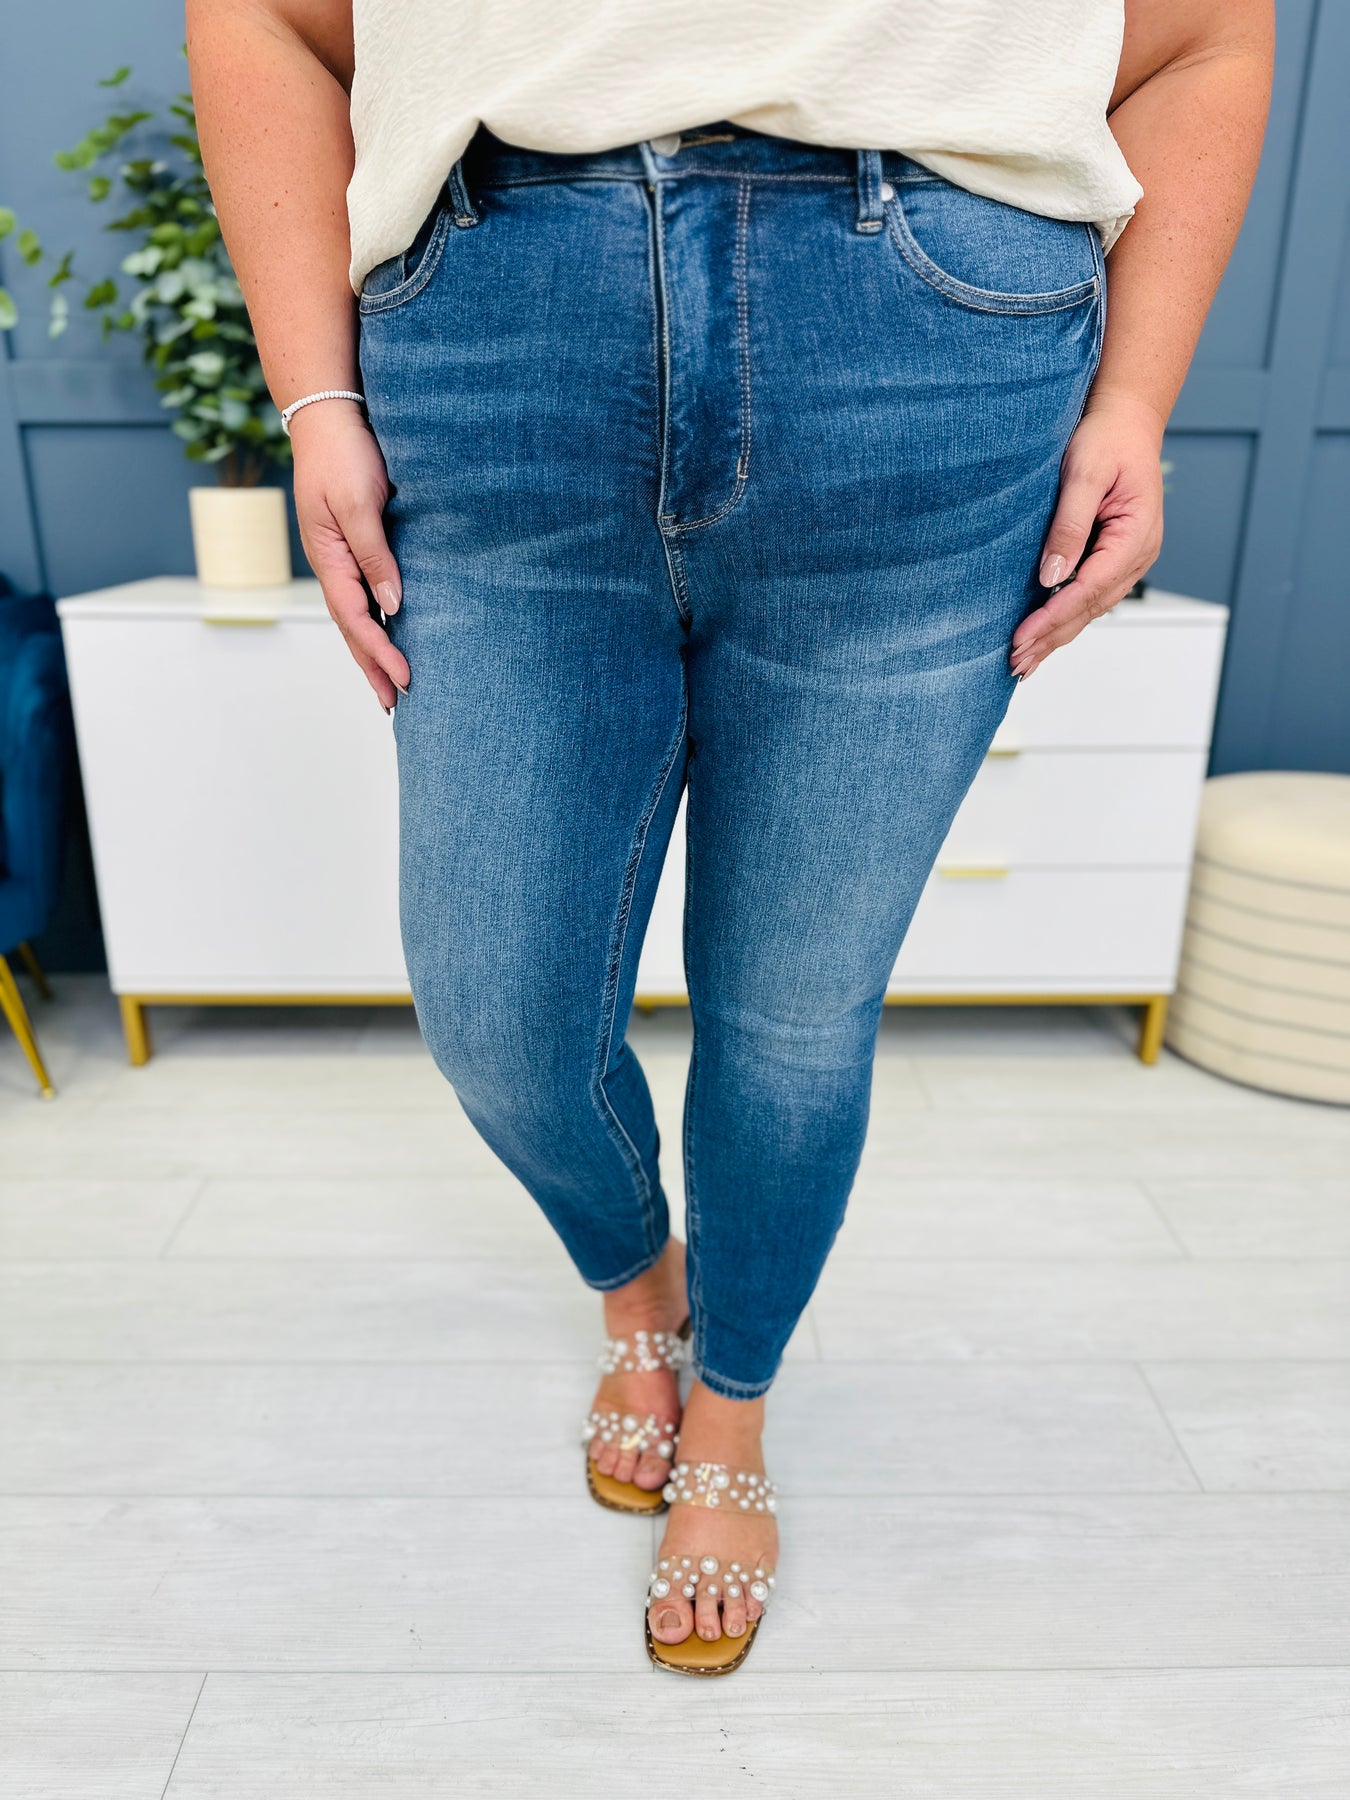 New Judy Blue spring Tummy Control Jeans are here! 👏 #shopmoco  #mocoboutique #followmoco #ootd #outfitinspo #wiw #sizeinclusive…